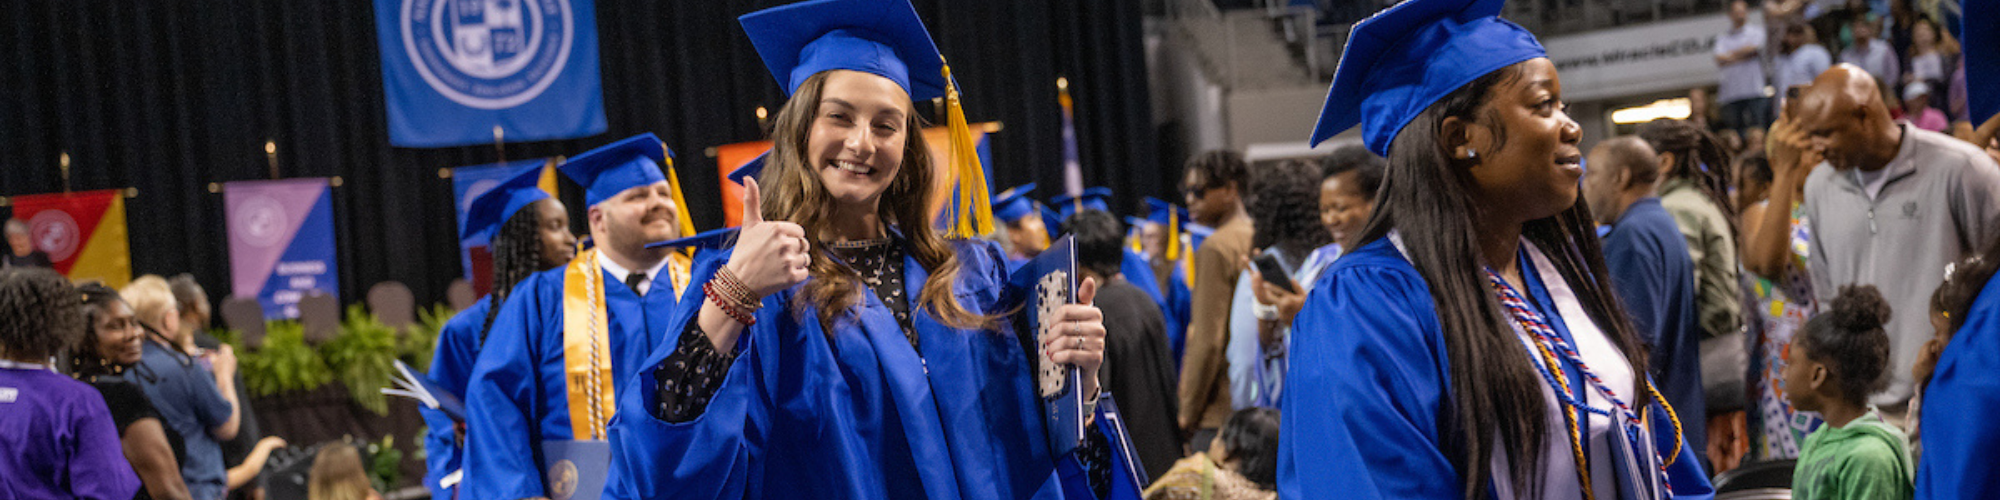 Photo of graduate giving thumbs up while in processional